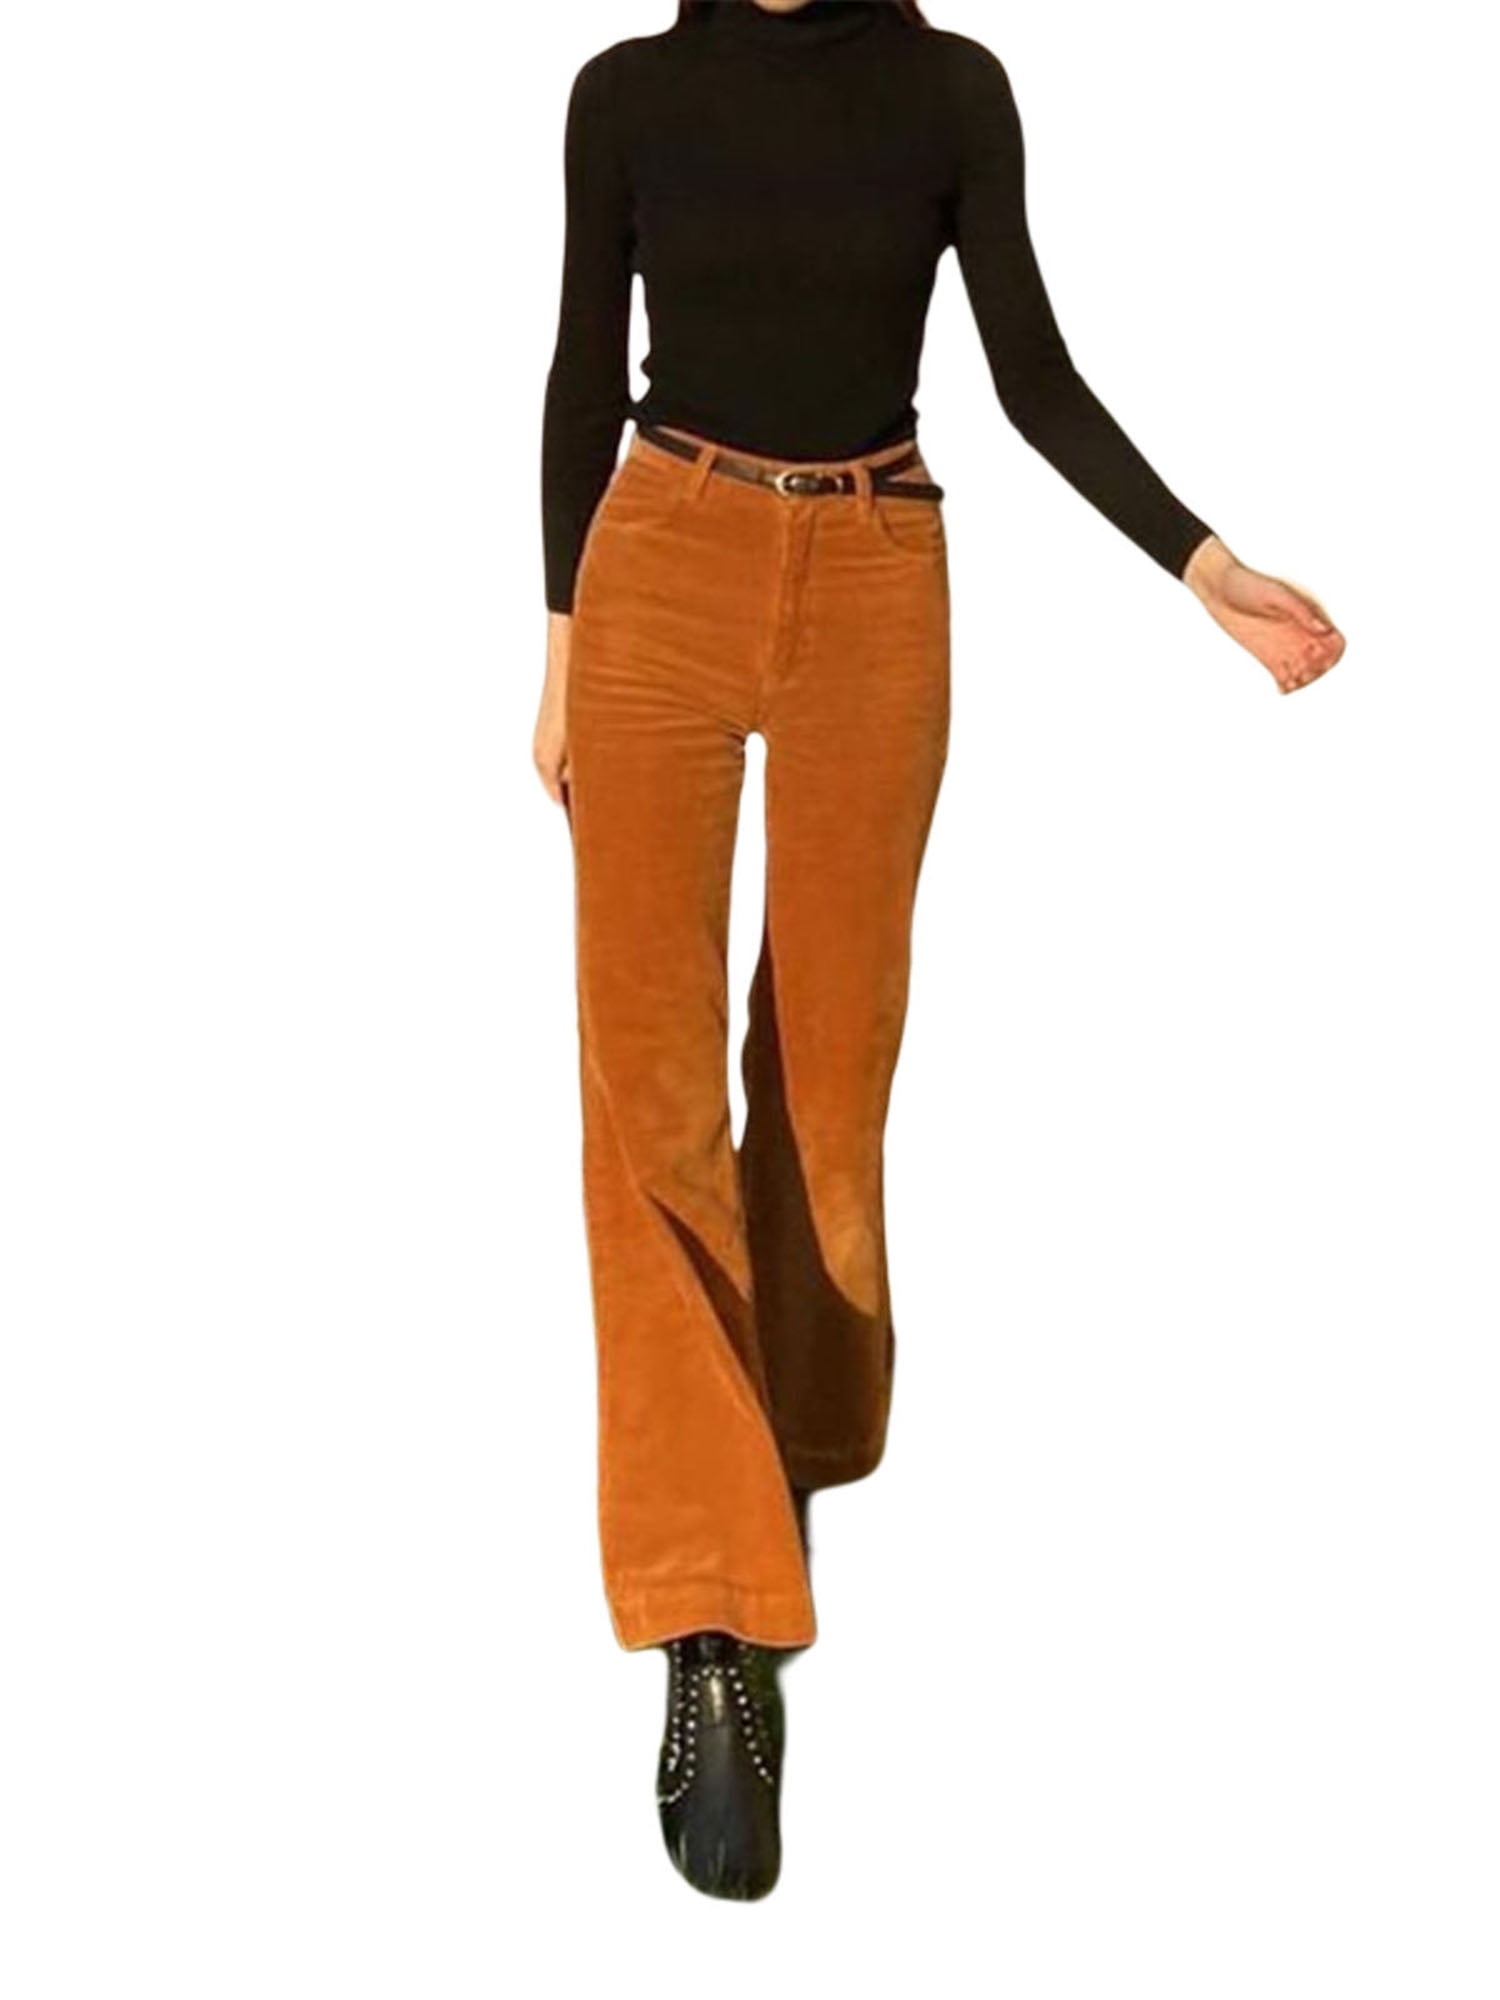 Domple Womens Slim Casual Solid Color High Rise Corduroy Bell Bottom Flared Pants